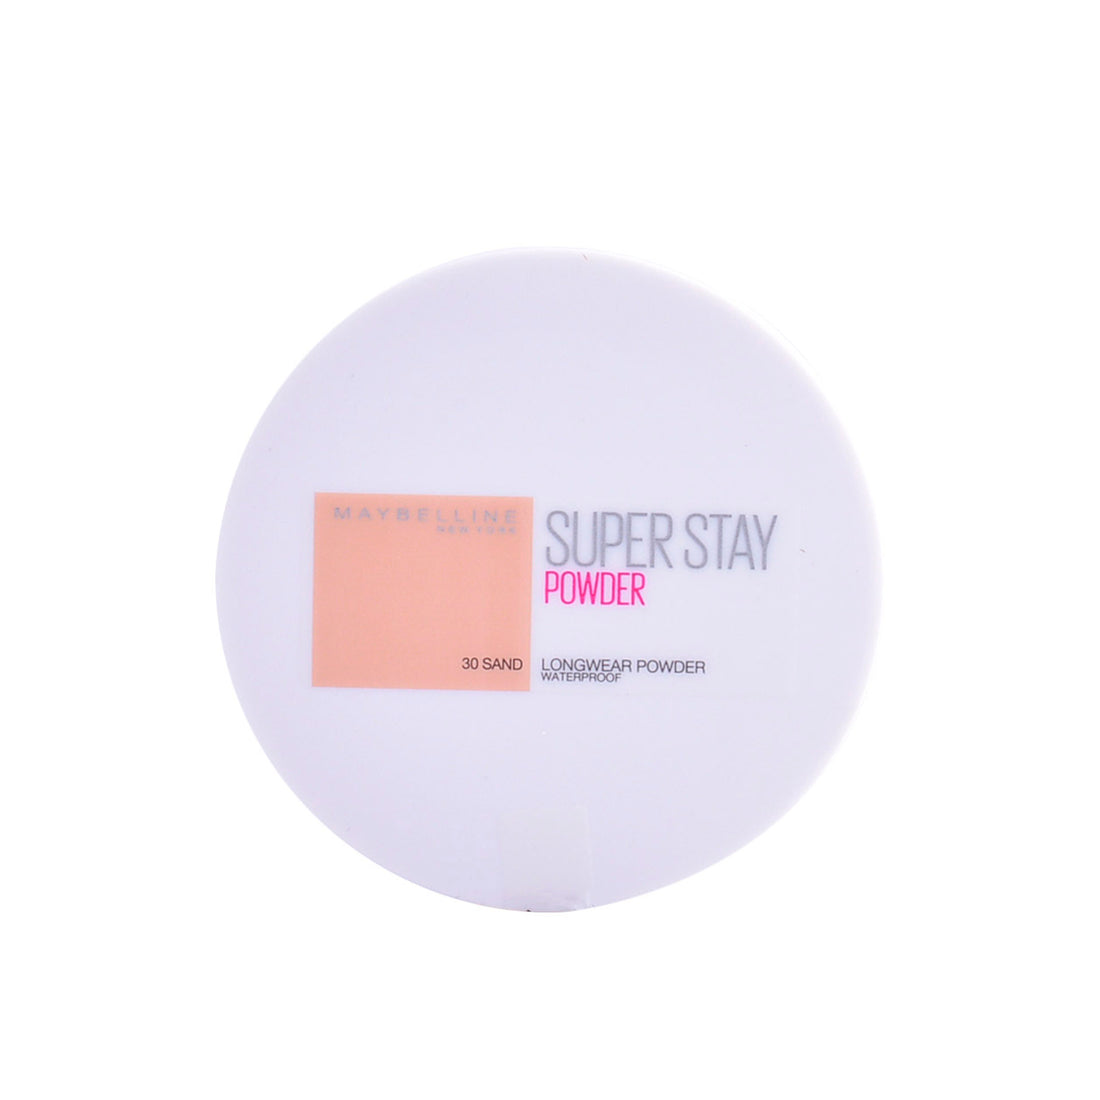 Maybelline Super Stay Compact 24H Waterproof No. 30 Sand